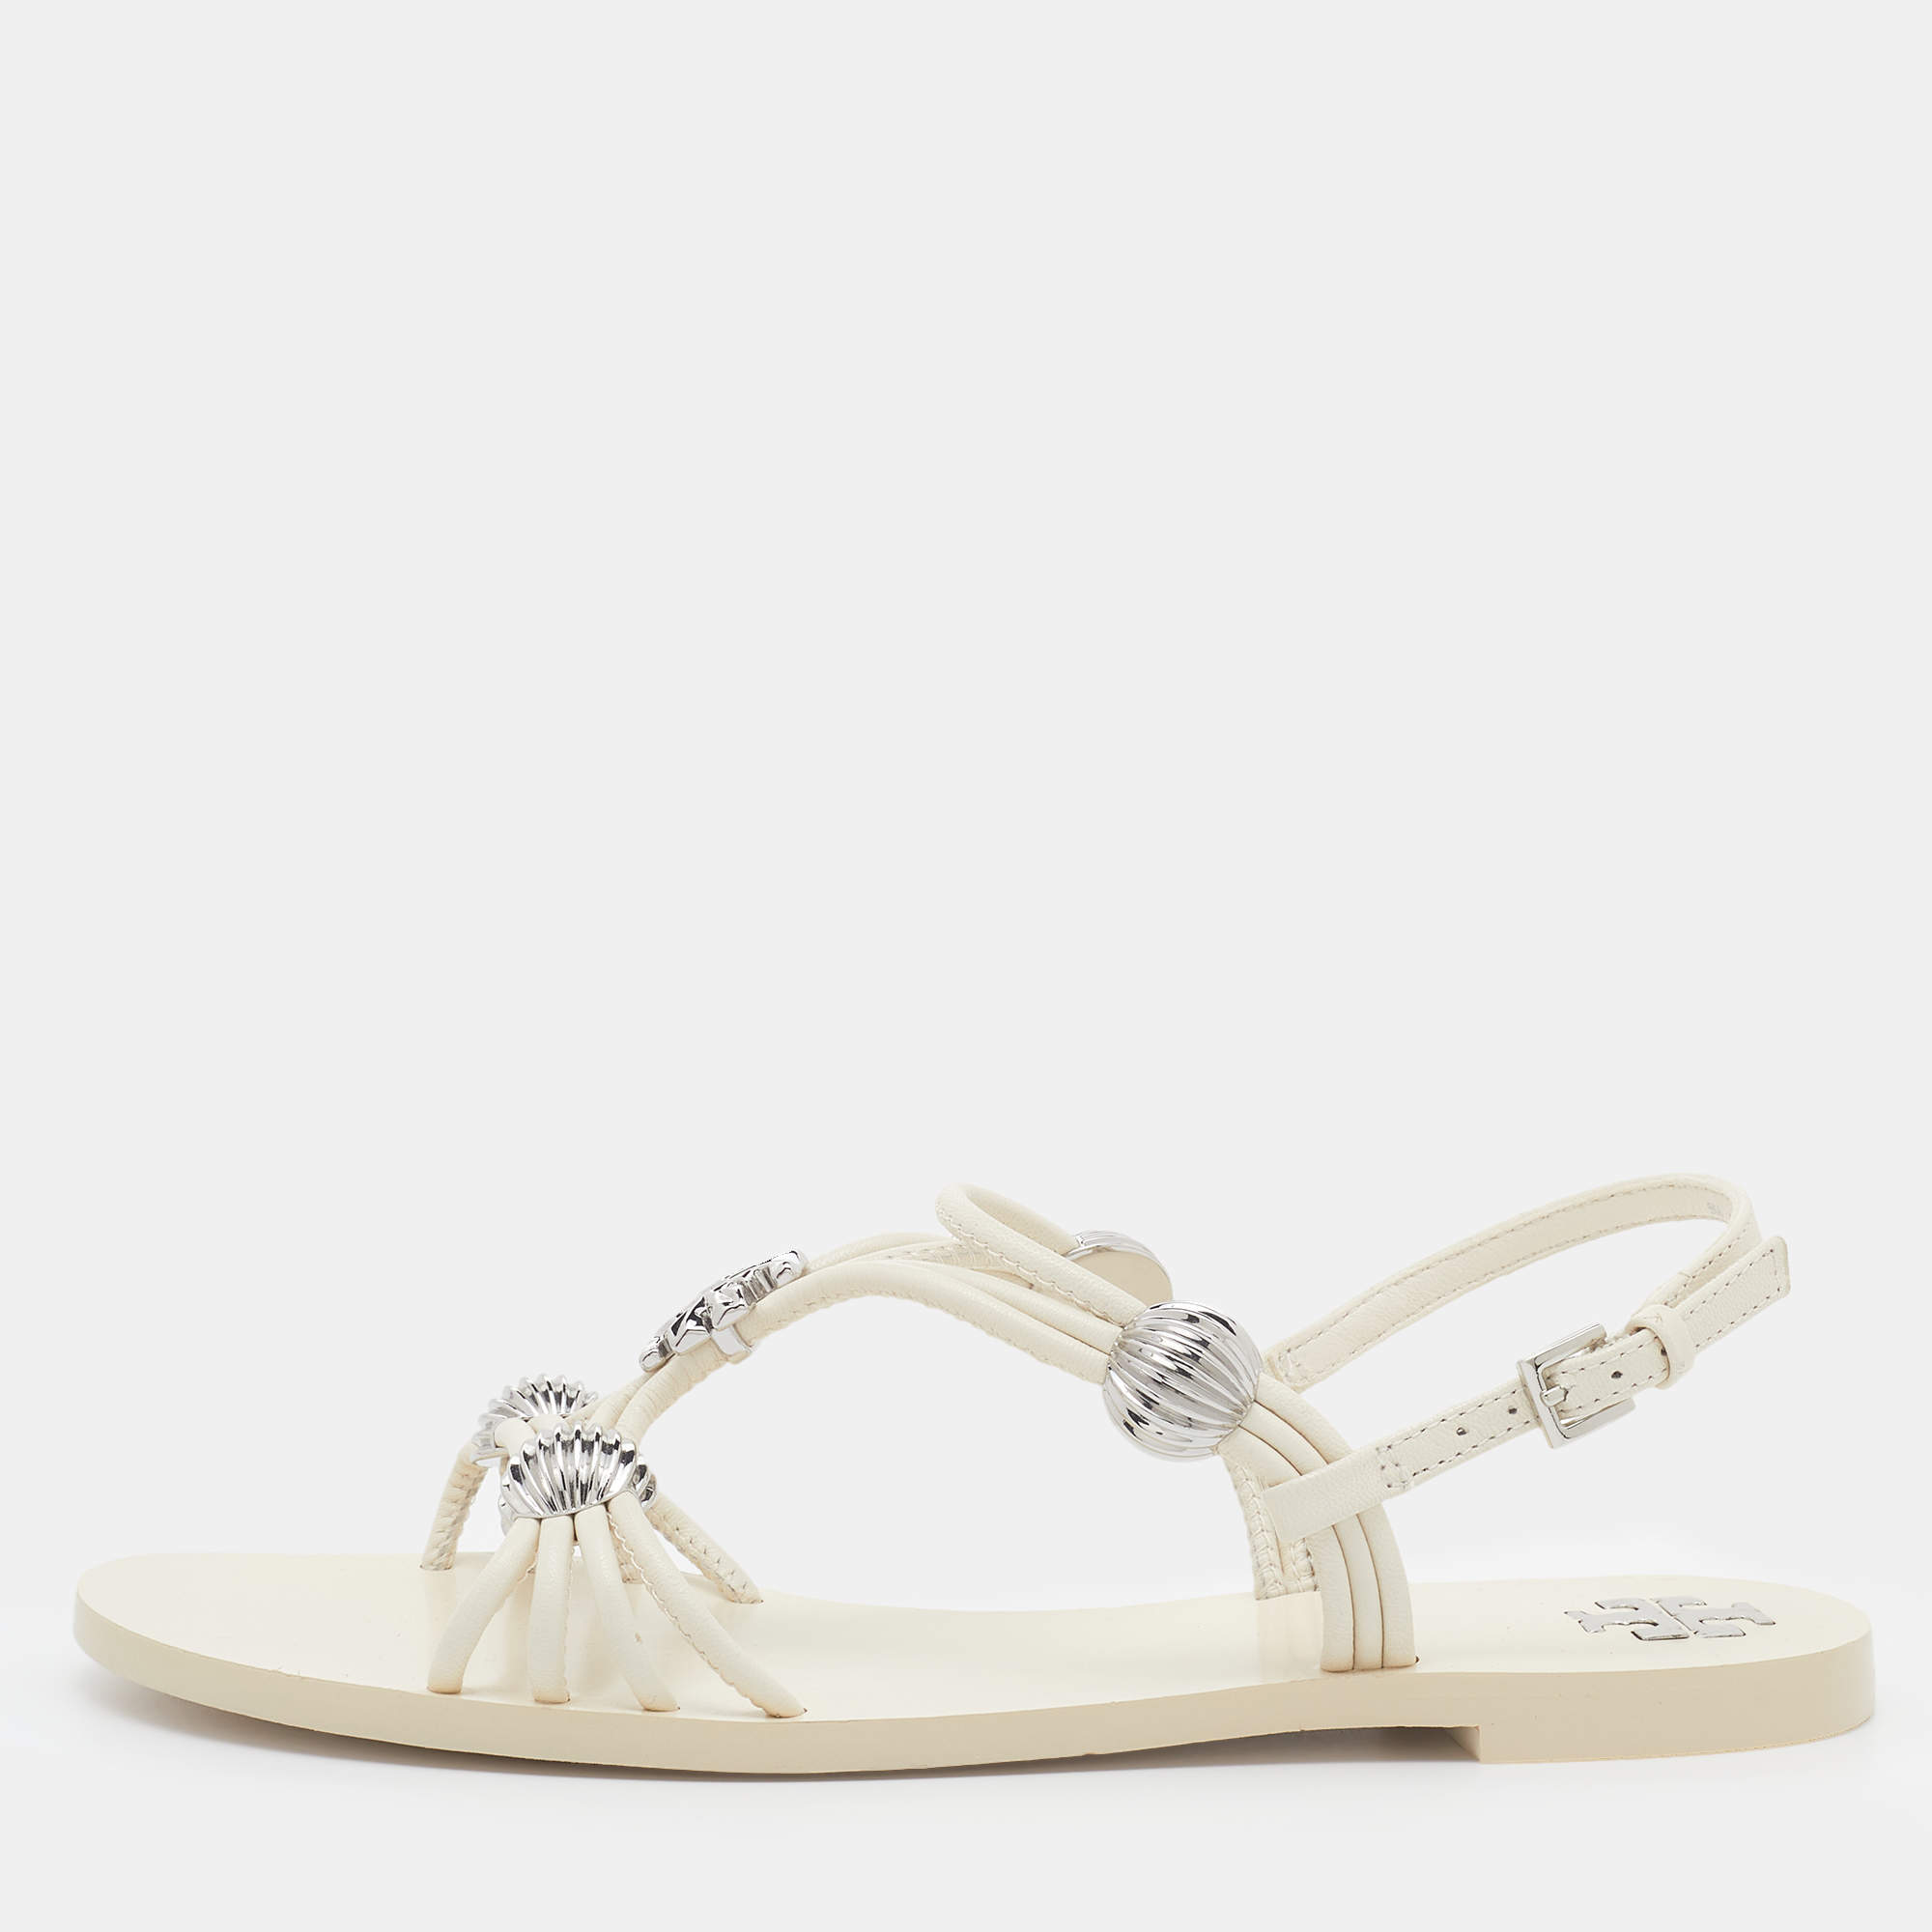 Tory Burch Off White Leather Embellished Flat Sandals Size 35 Tory Burch |  TLC